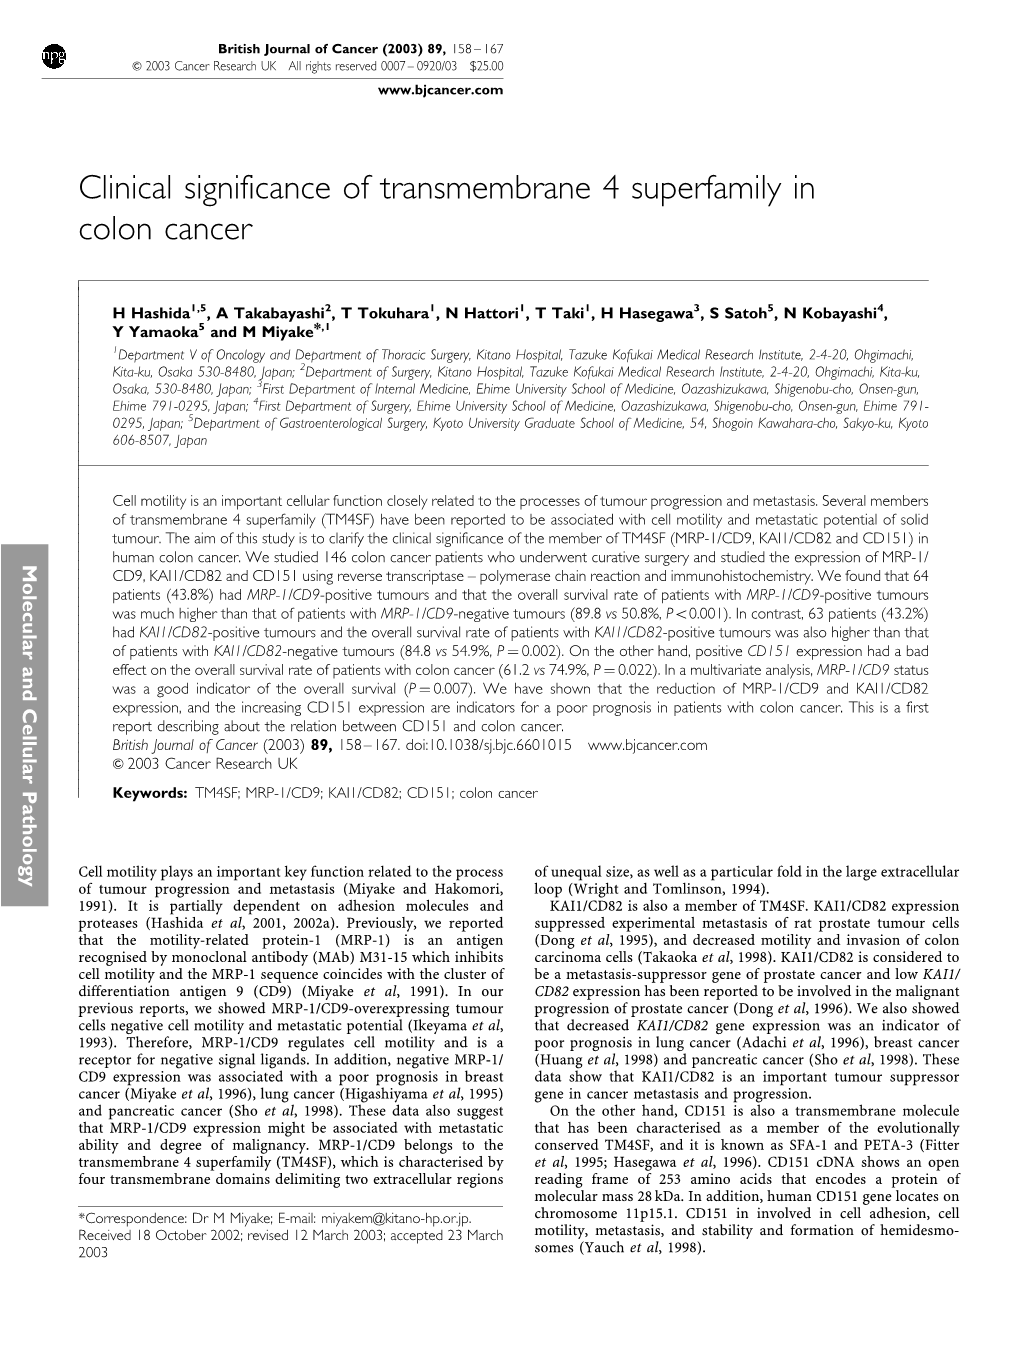 Clinical Significance of Transmembrane 4 Superfamily in Colon Cancer